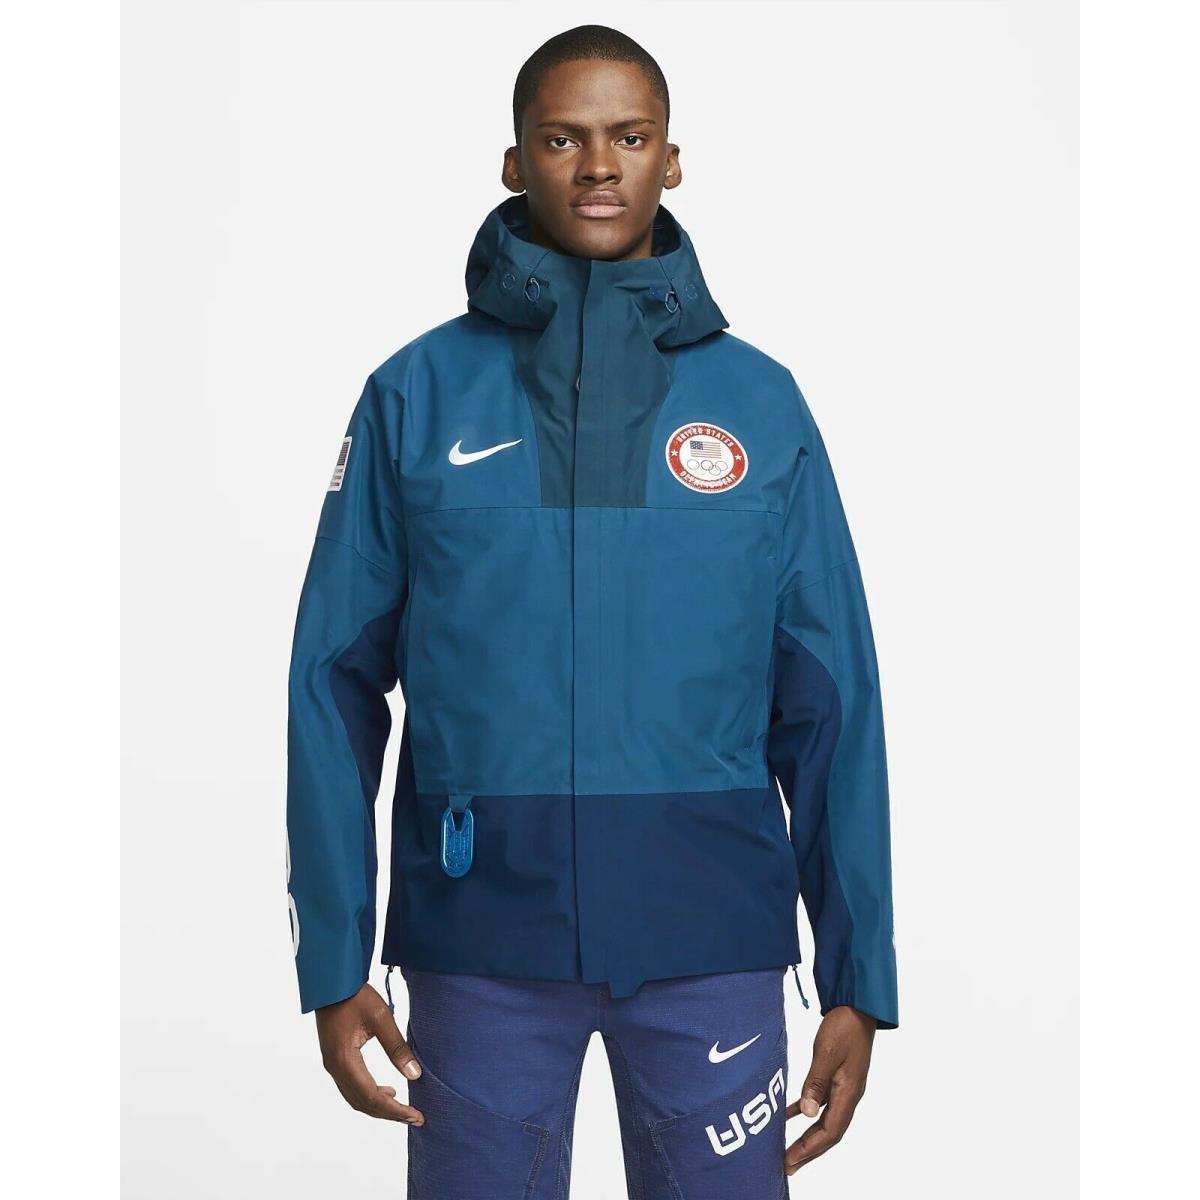 Nike Acg Usa Olympic Chain of Craters Jacket Blue DD8845-492 Men`s Size Large